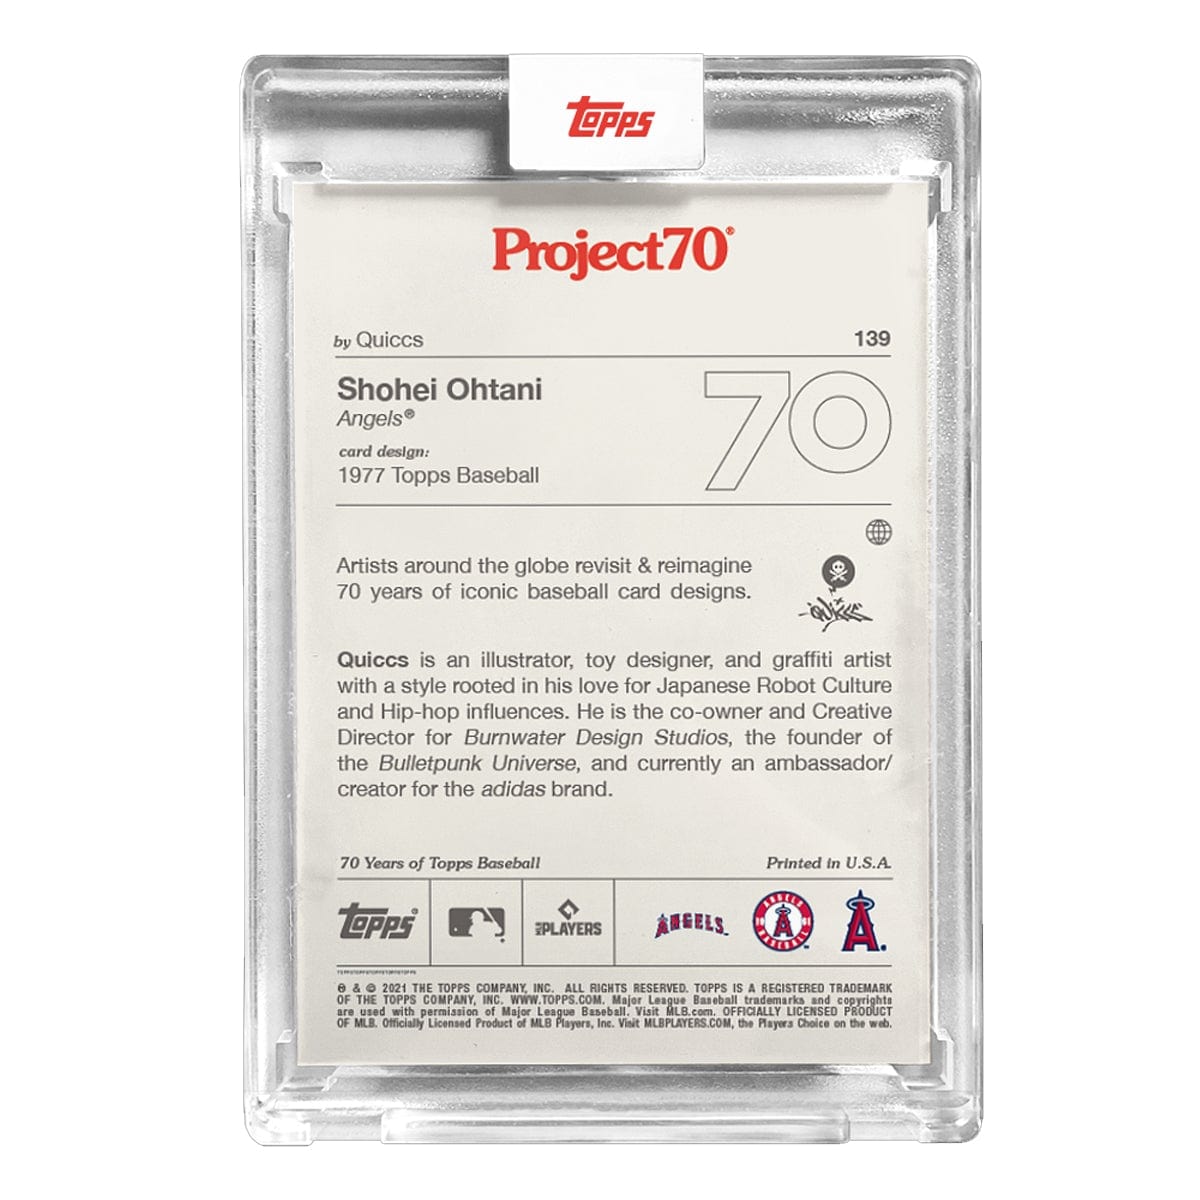 Shohei Ohtani by Quiccs - Topps Project 70